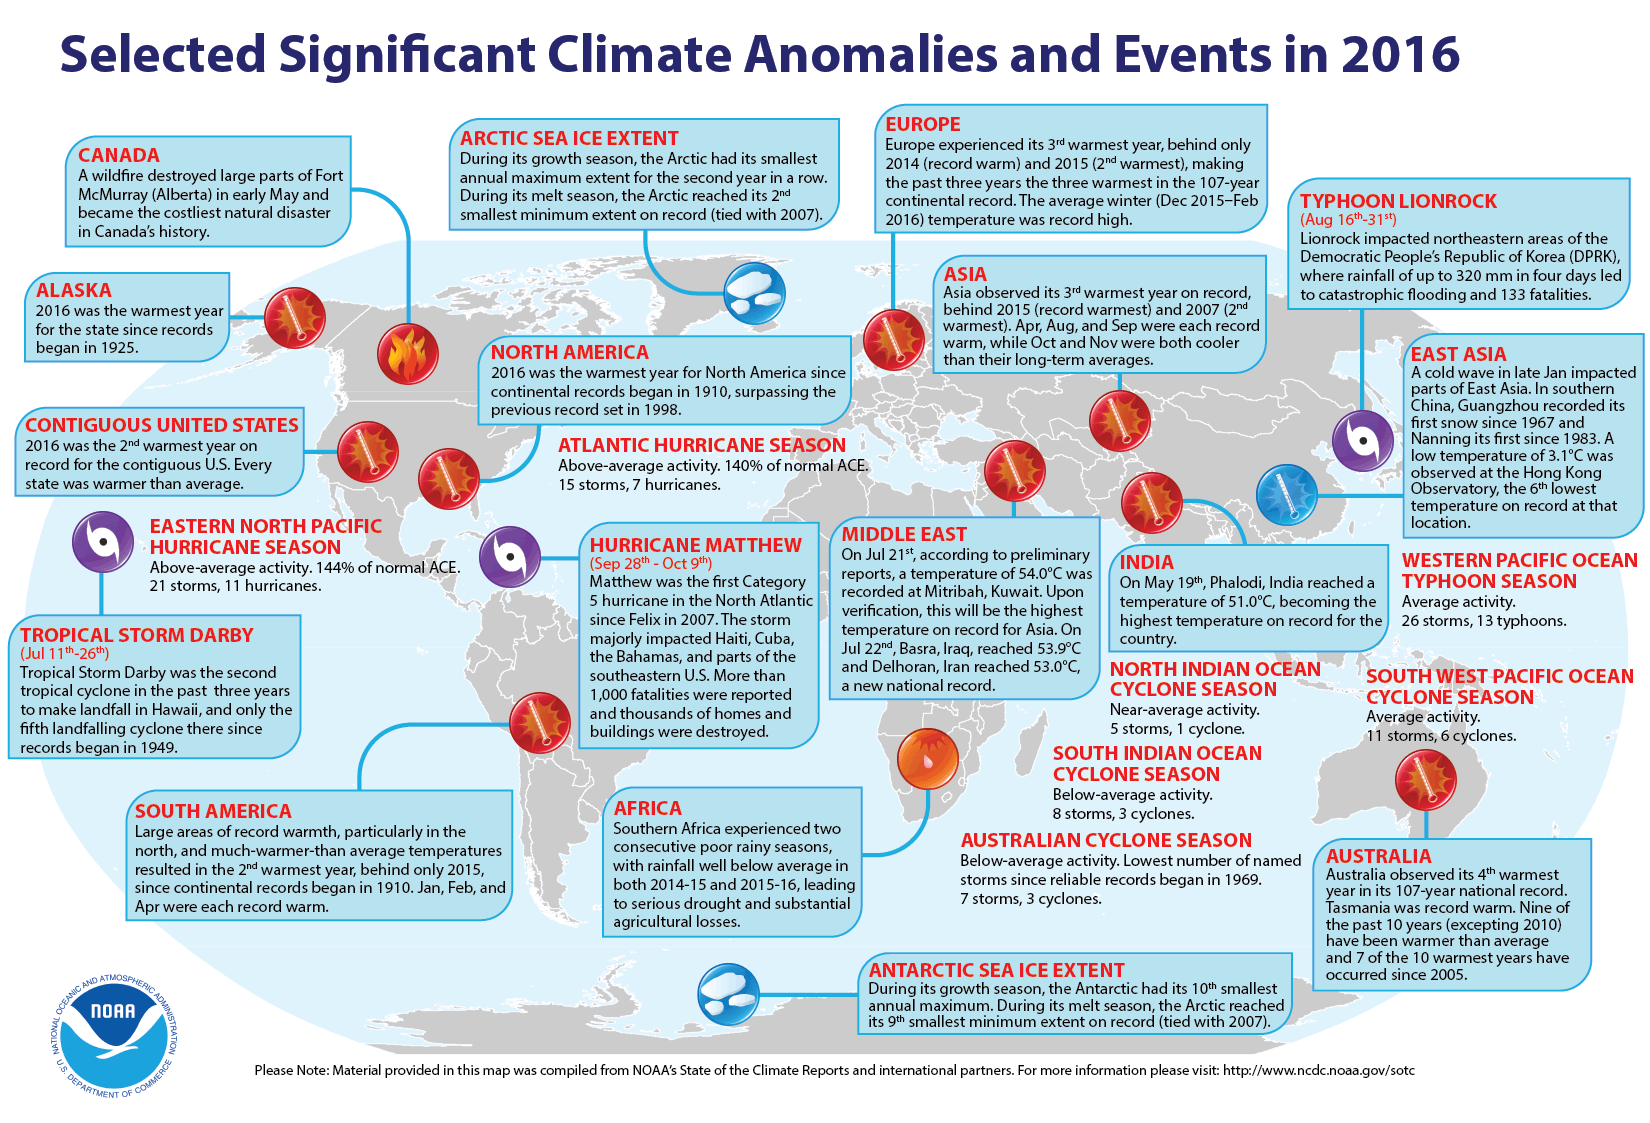 2016 Selected Climate Anomalies and Events Map